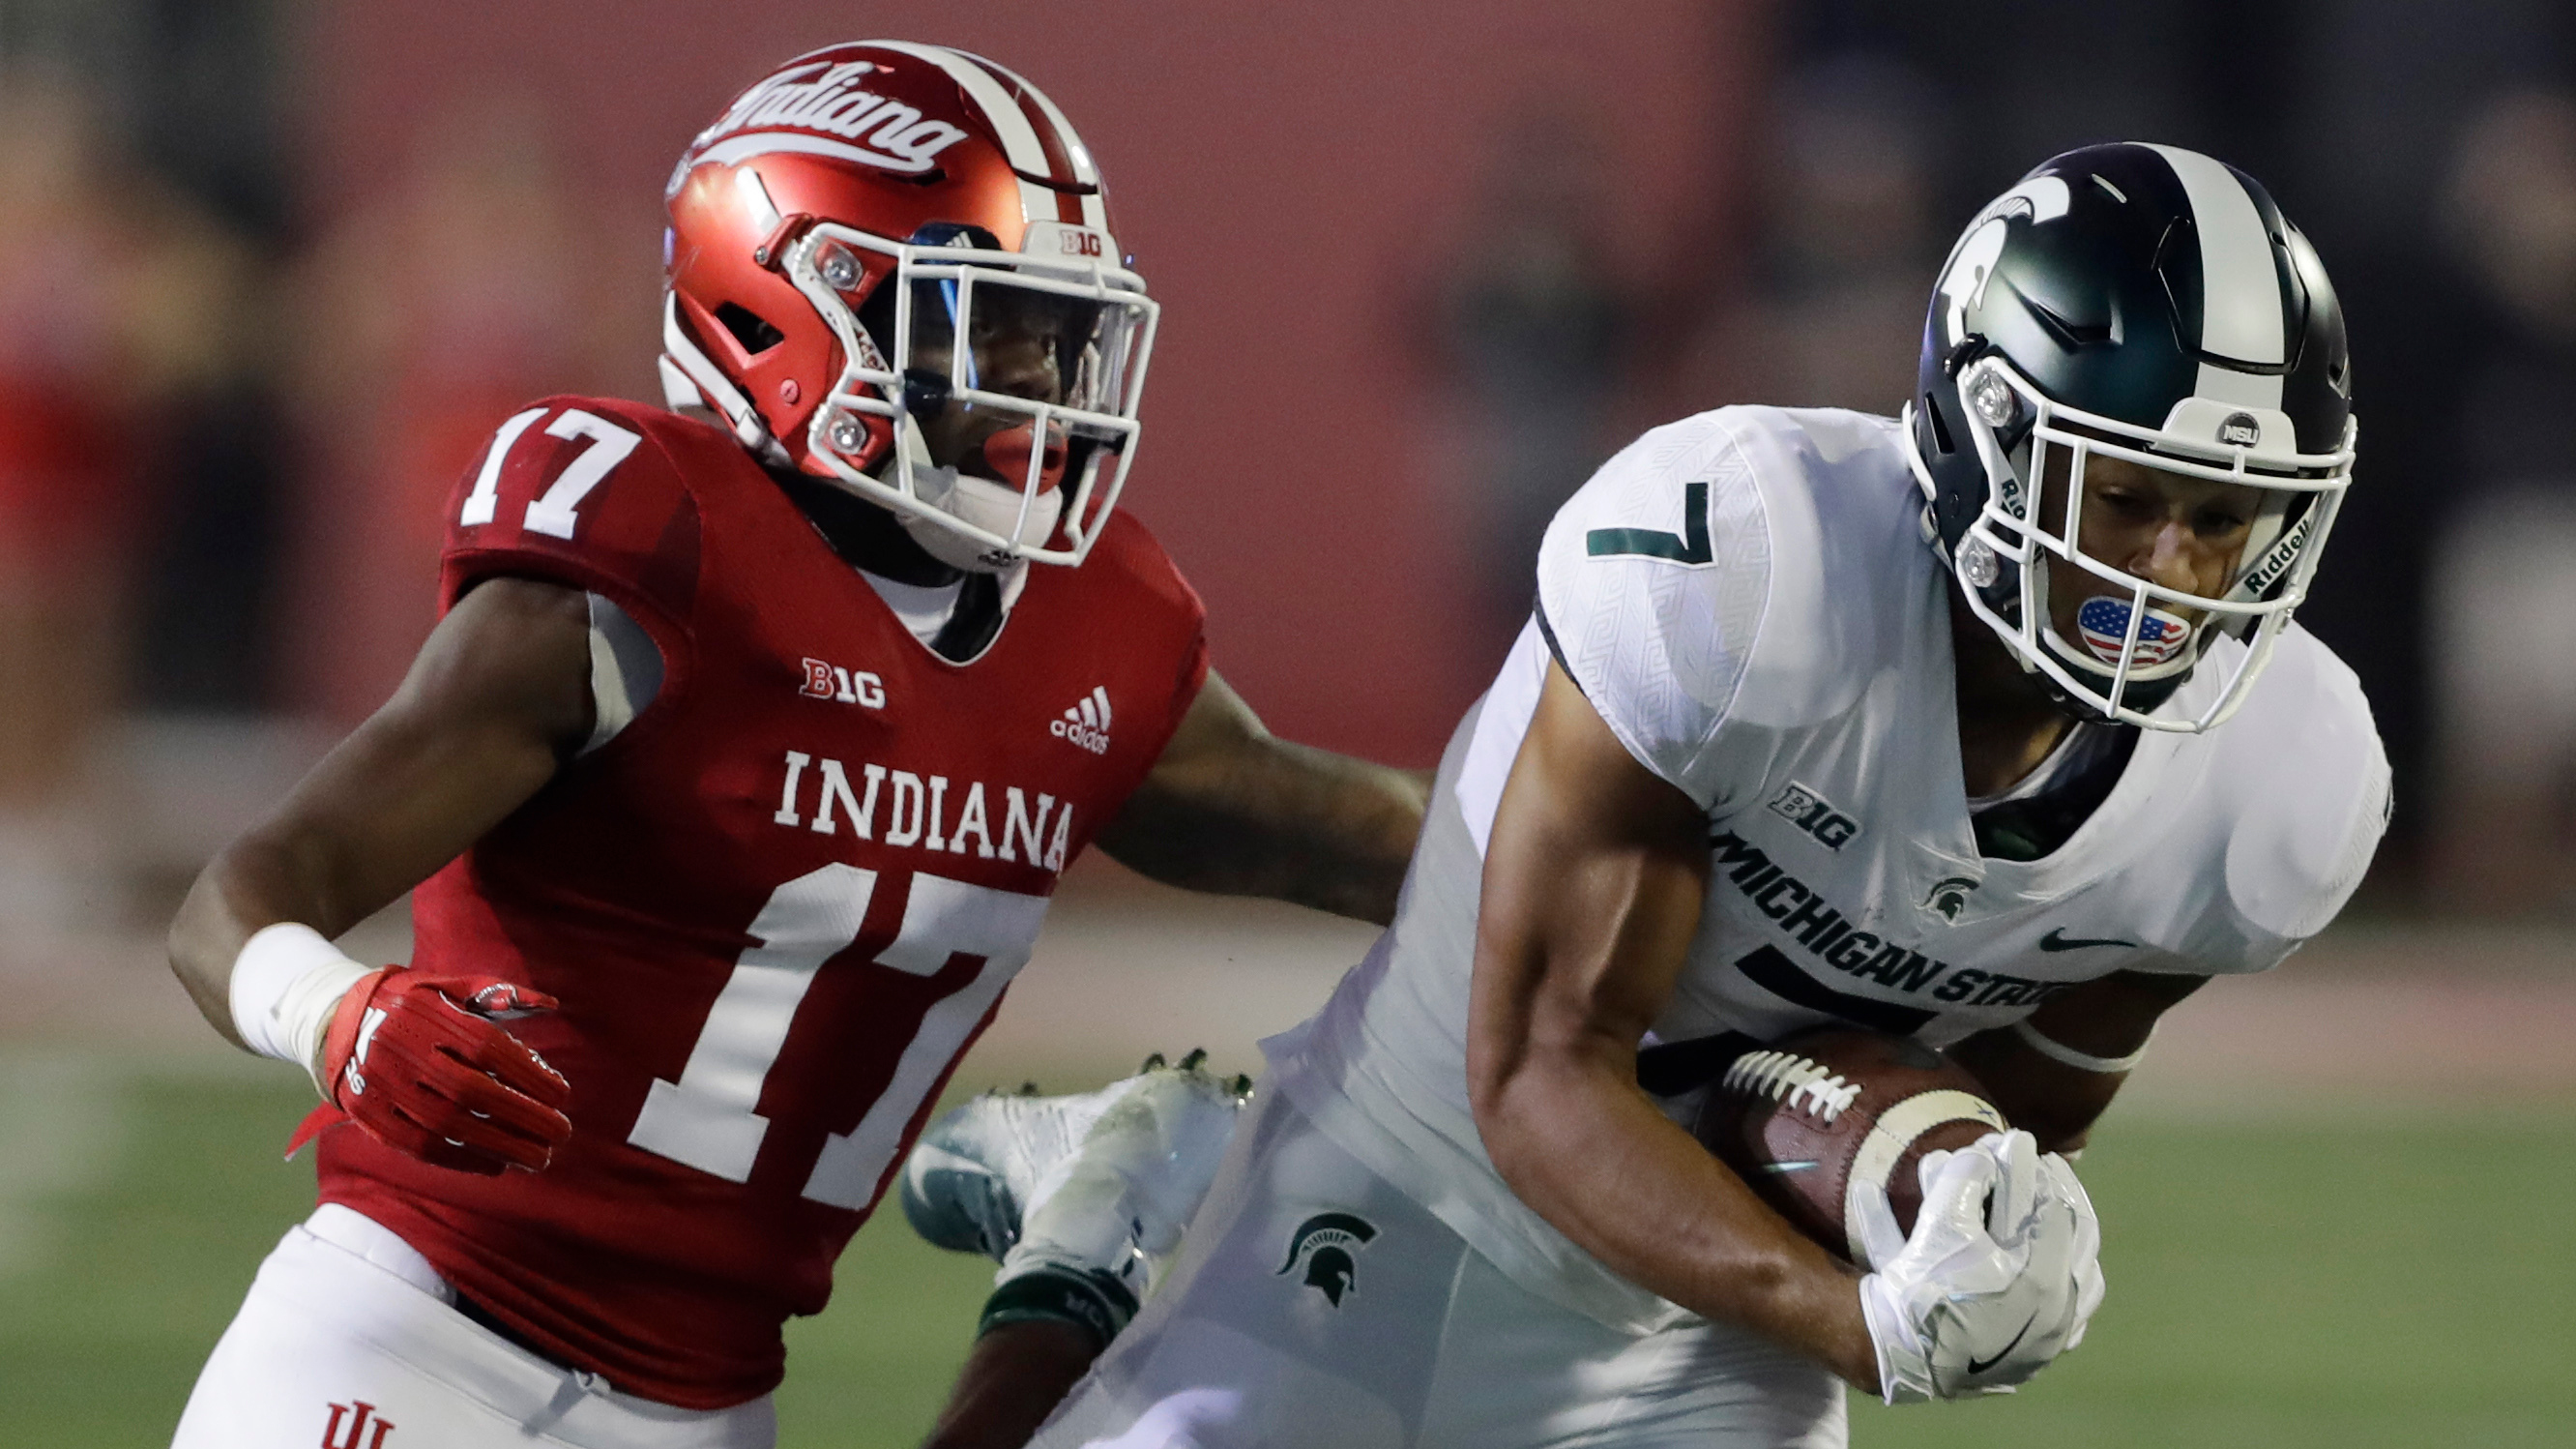 Indiana's slow start proves costly in 35-21 loss to No. 24 Michigan State